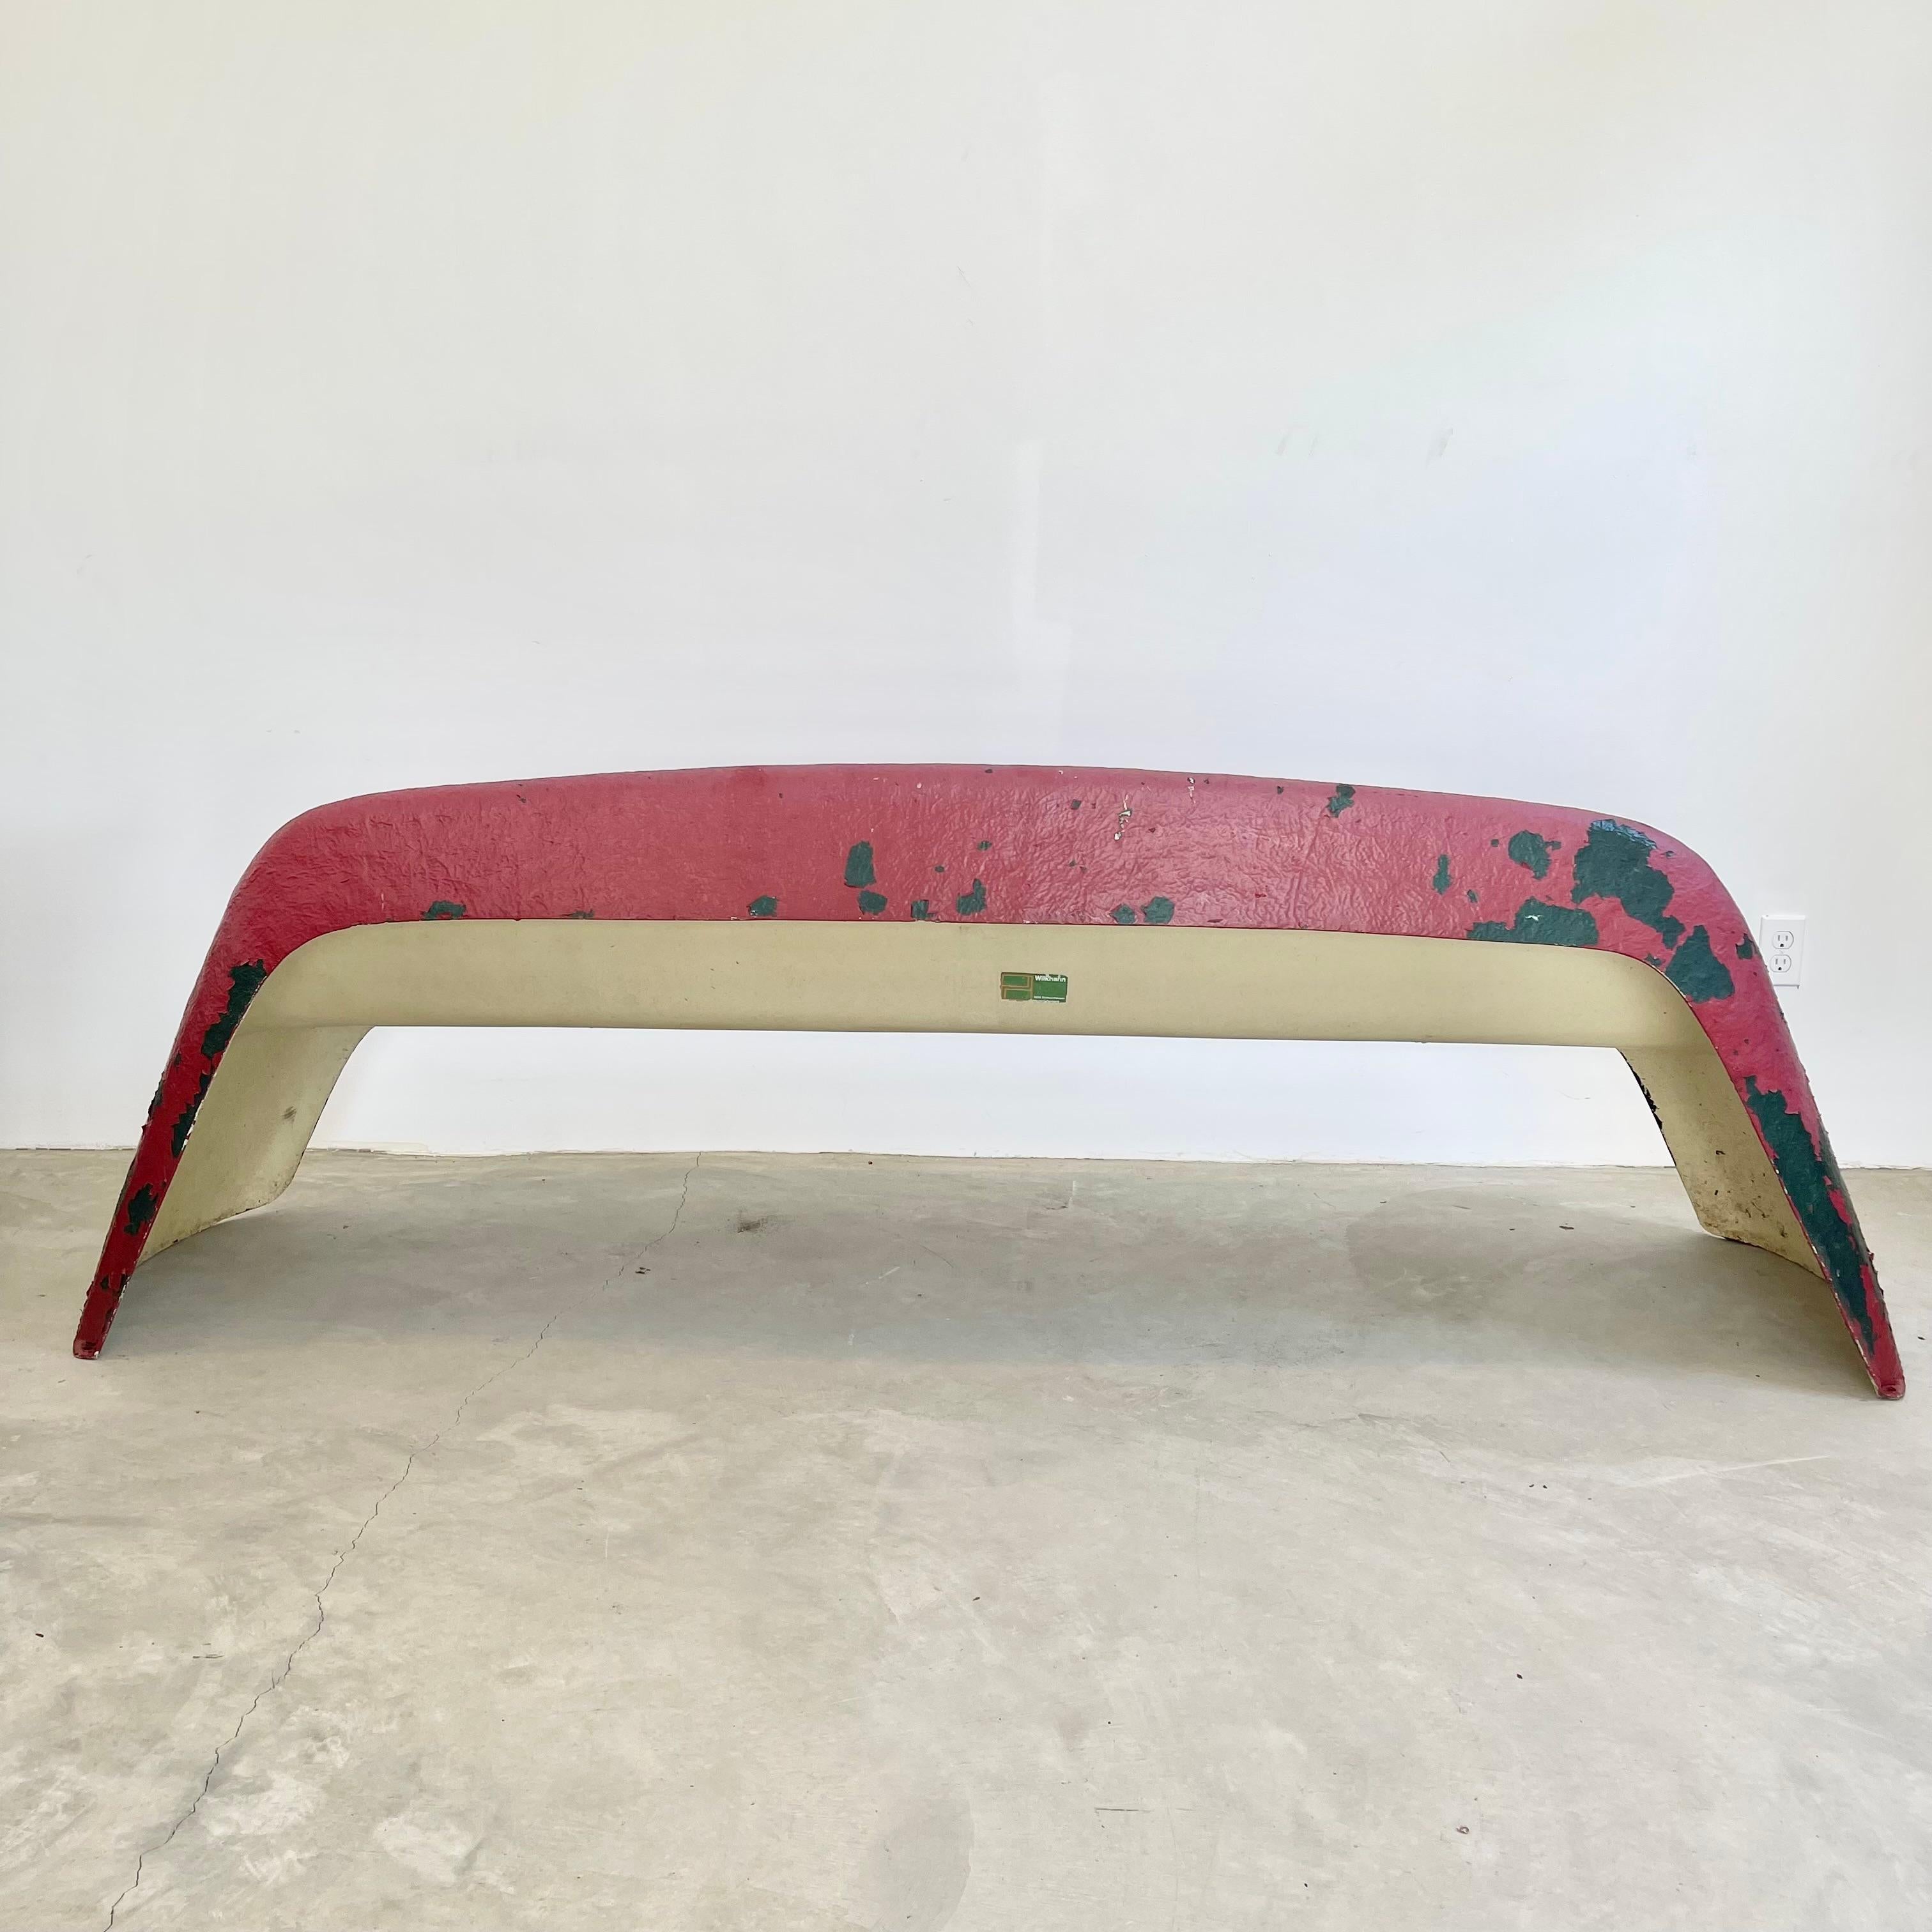 Minimalist Sculptural Red Fiberglass Bench by Walter Papst, 1960s Germany